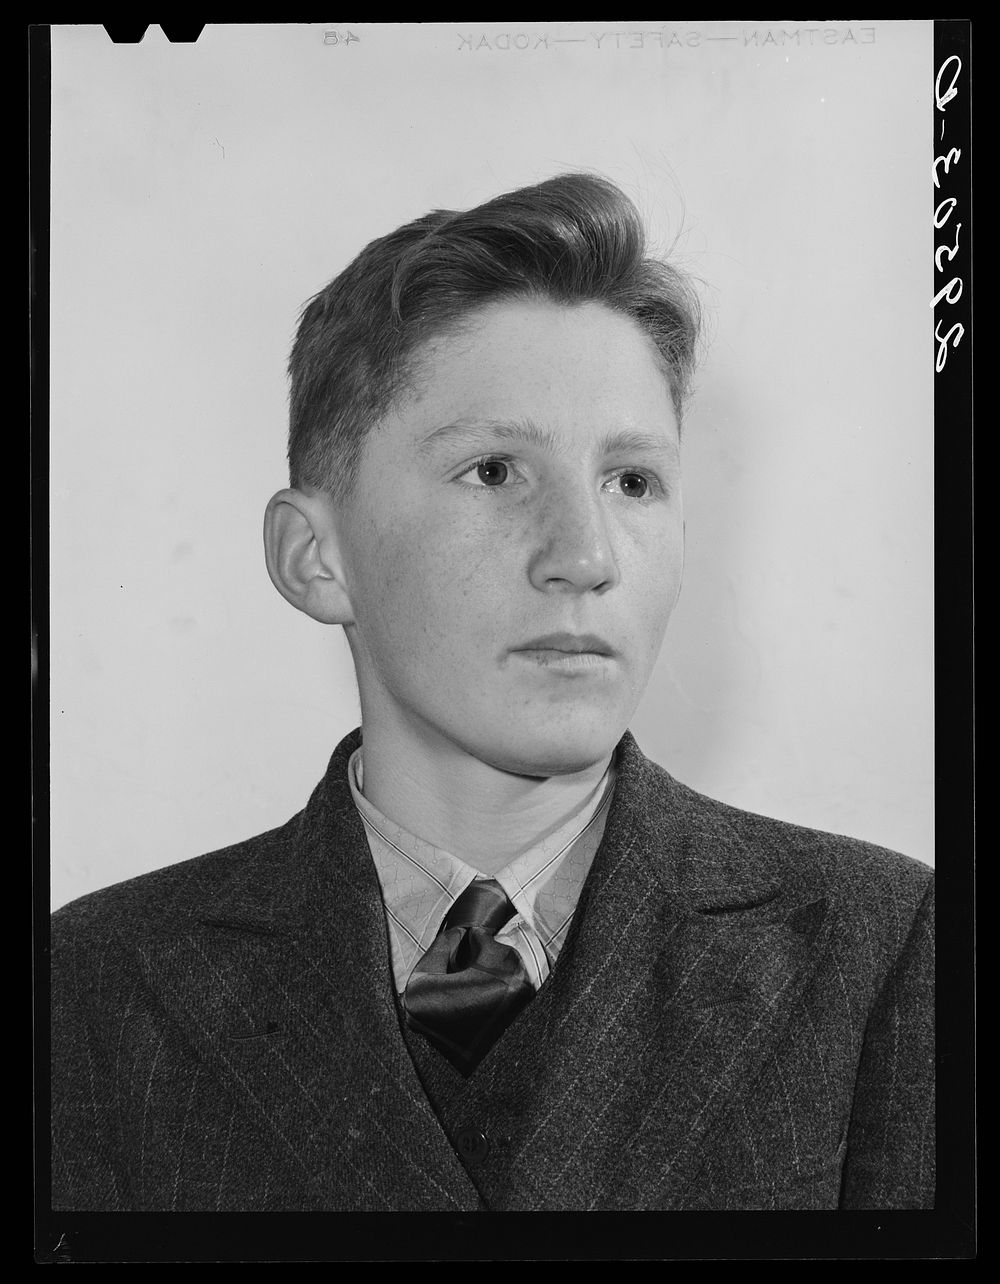 4-H Club boy. Marshalltown, Iowa. Sourced from the Library of Congress.